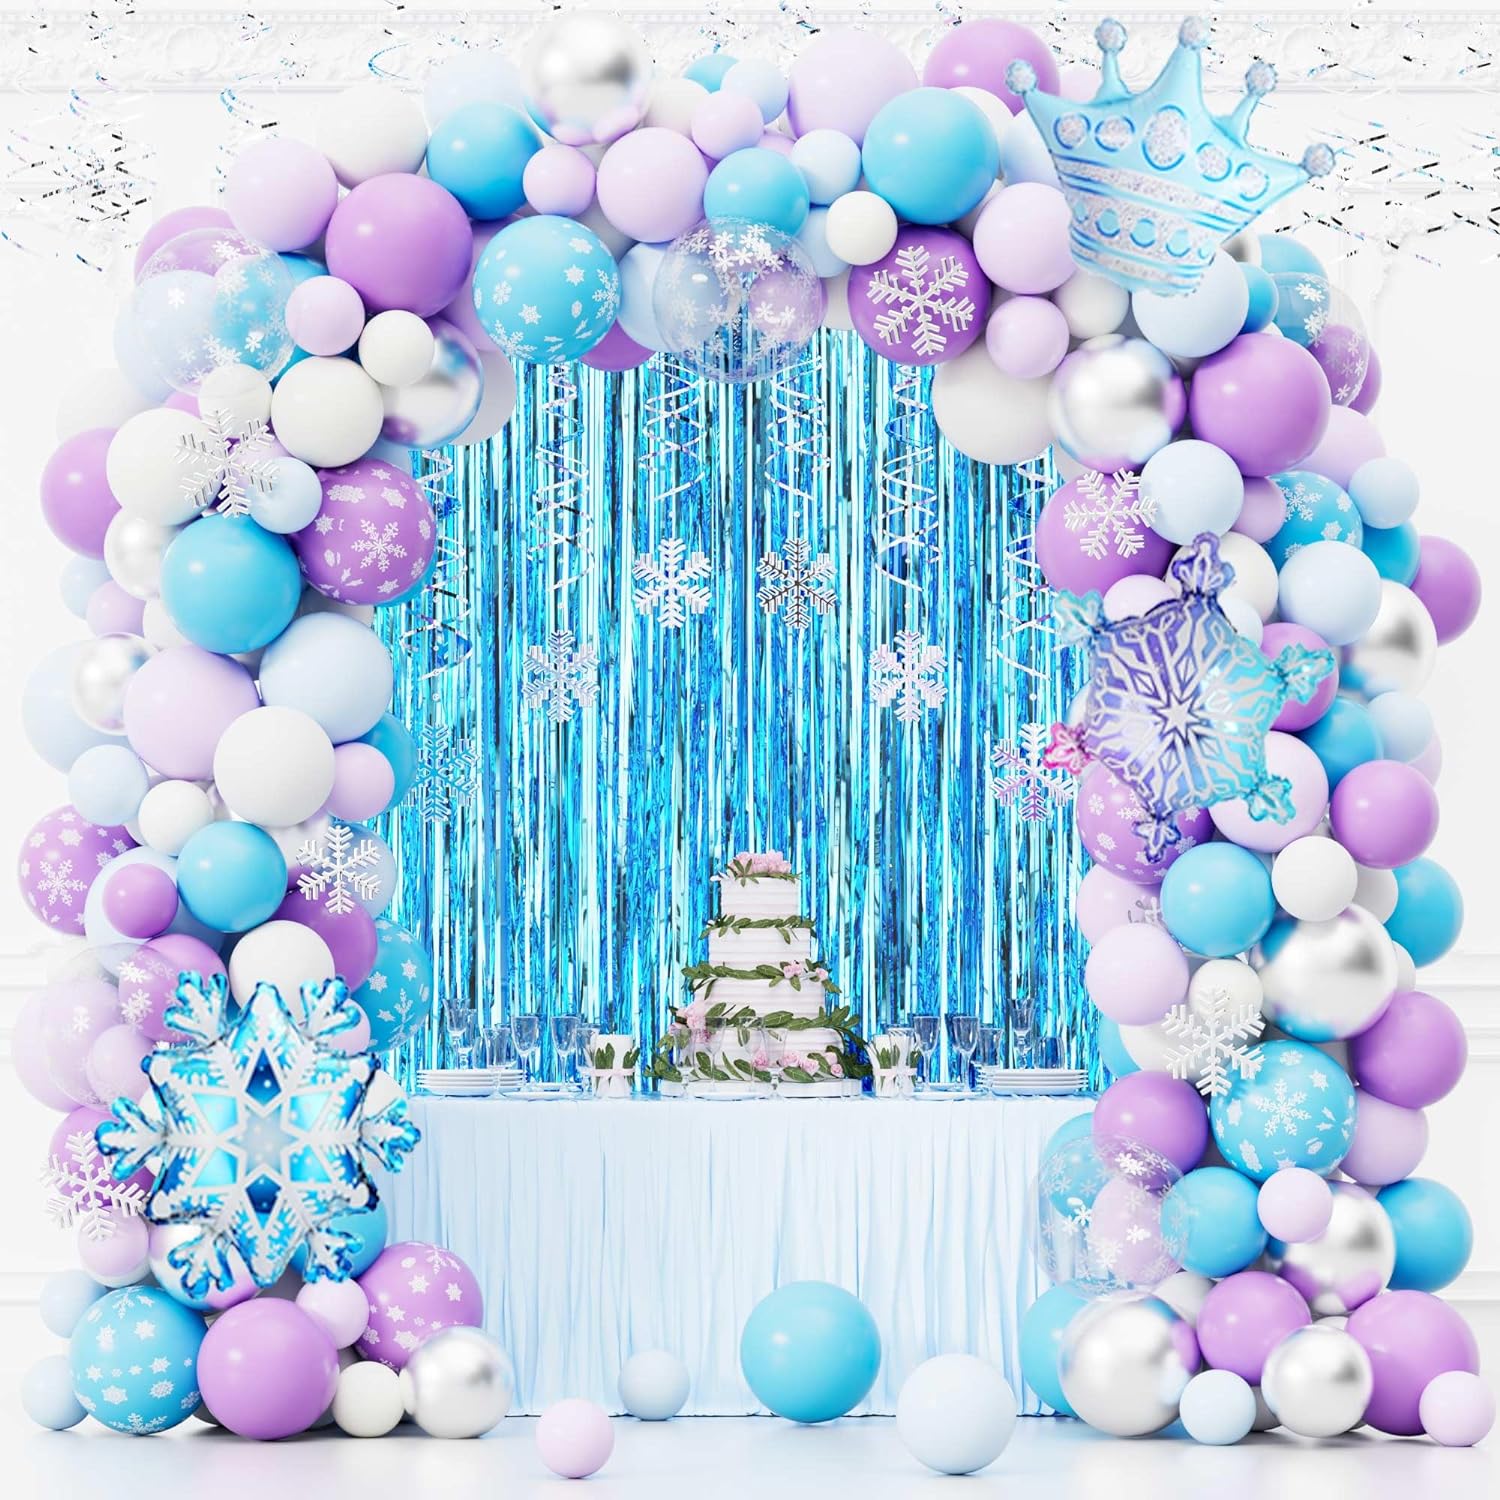 thinkstar 167Pcs Frozen Birthday Party Supplies - Frozen Party Decorations Balloons Arch Kit For Kids Boys Girls Baby Shower Froze…